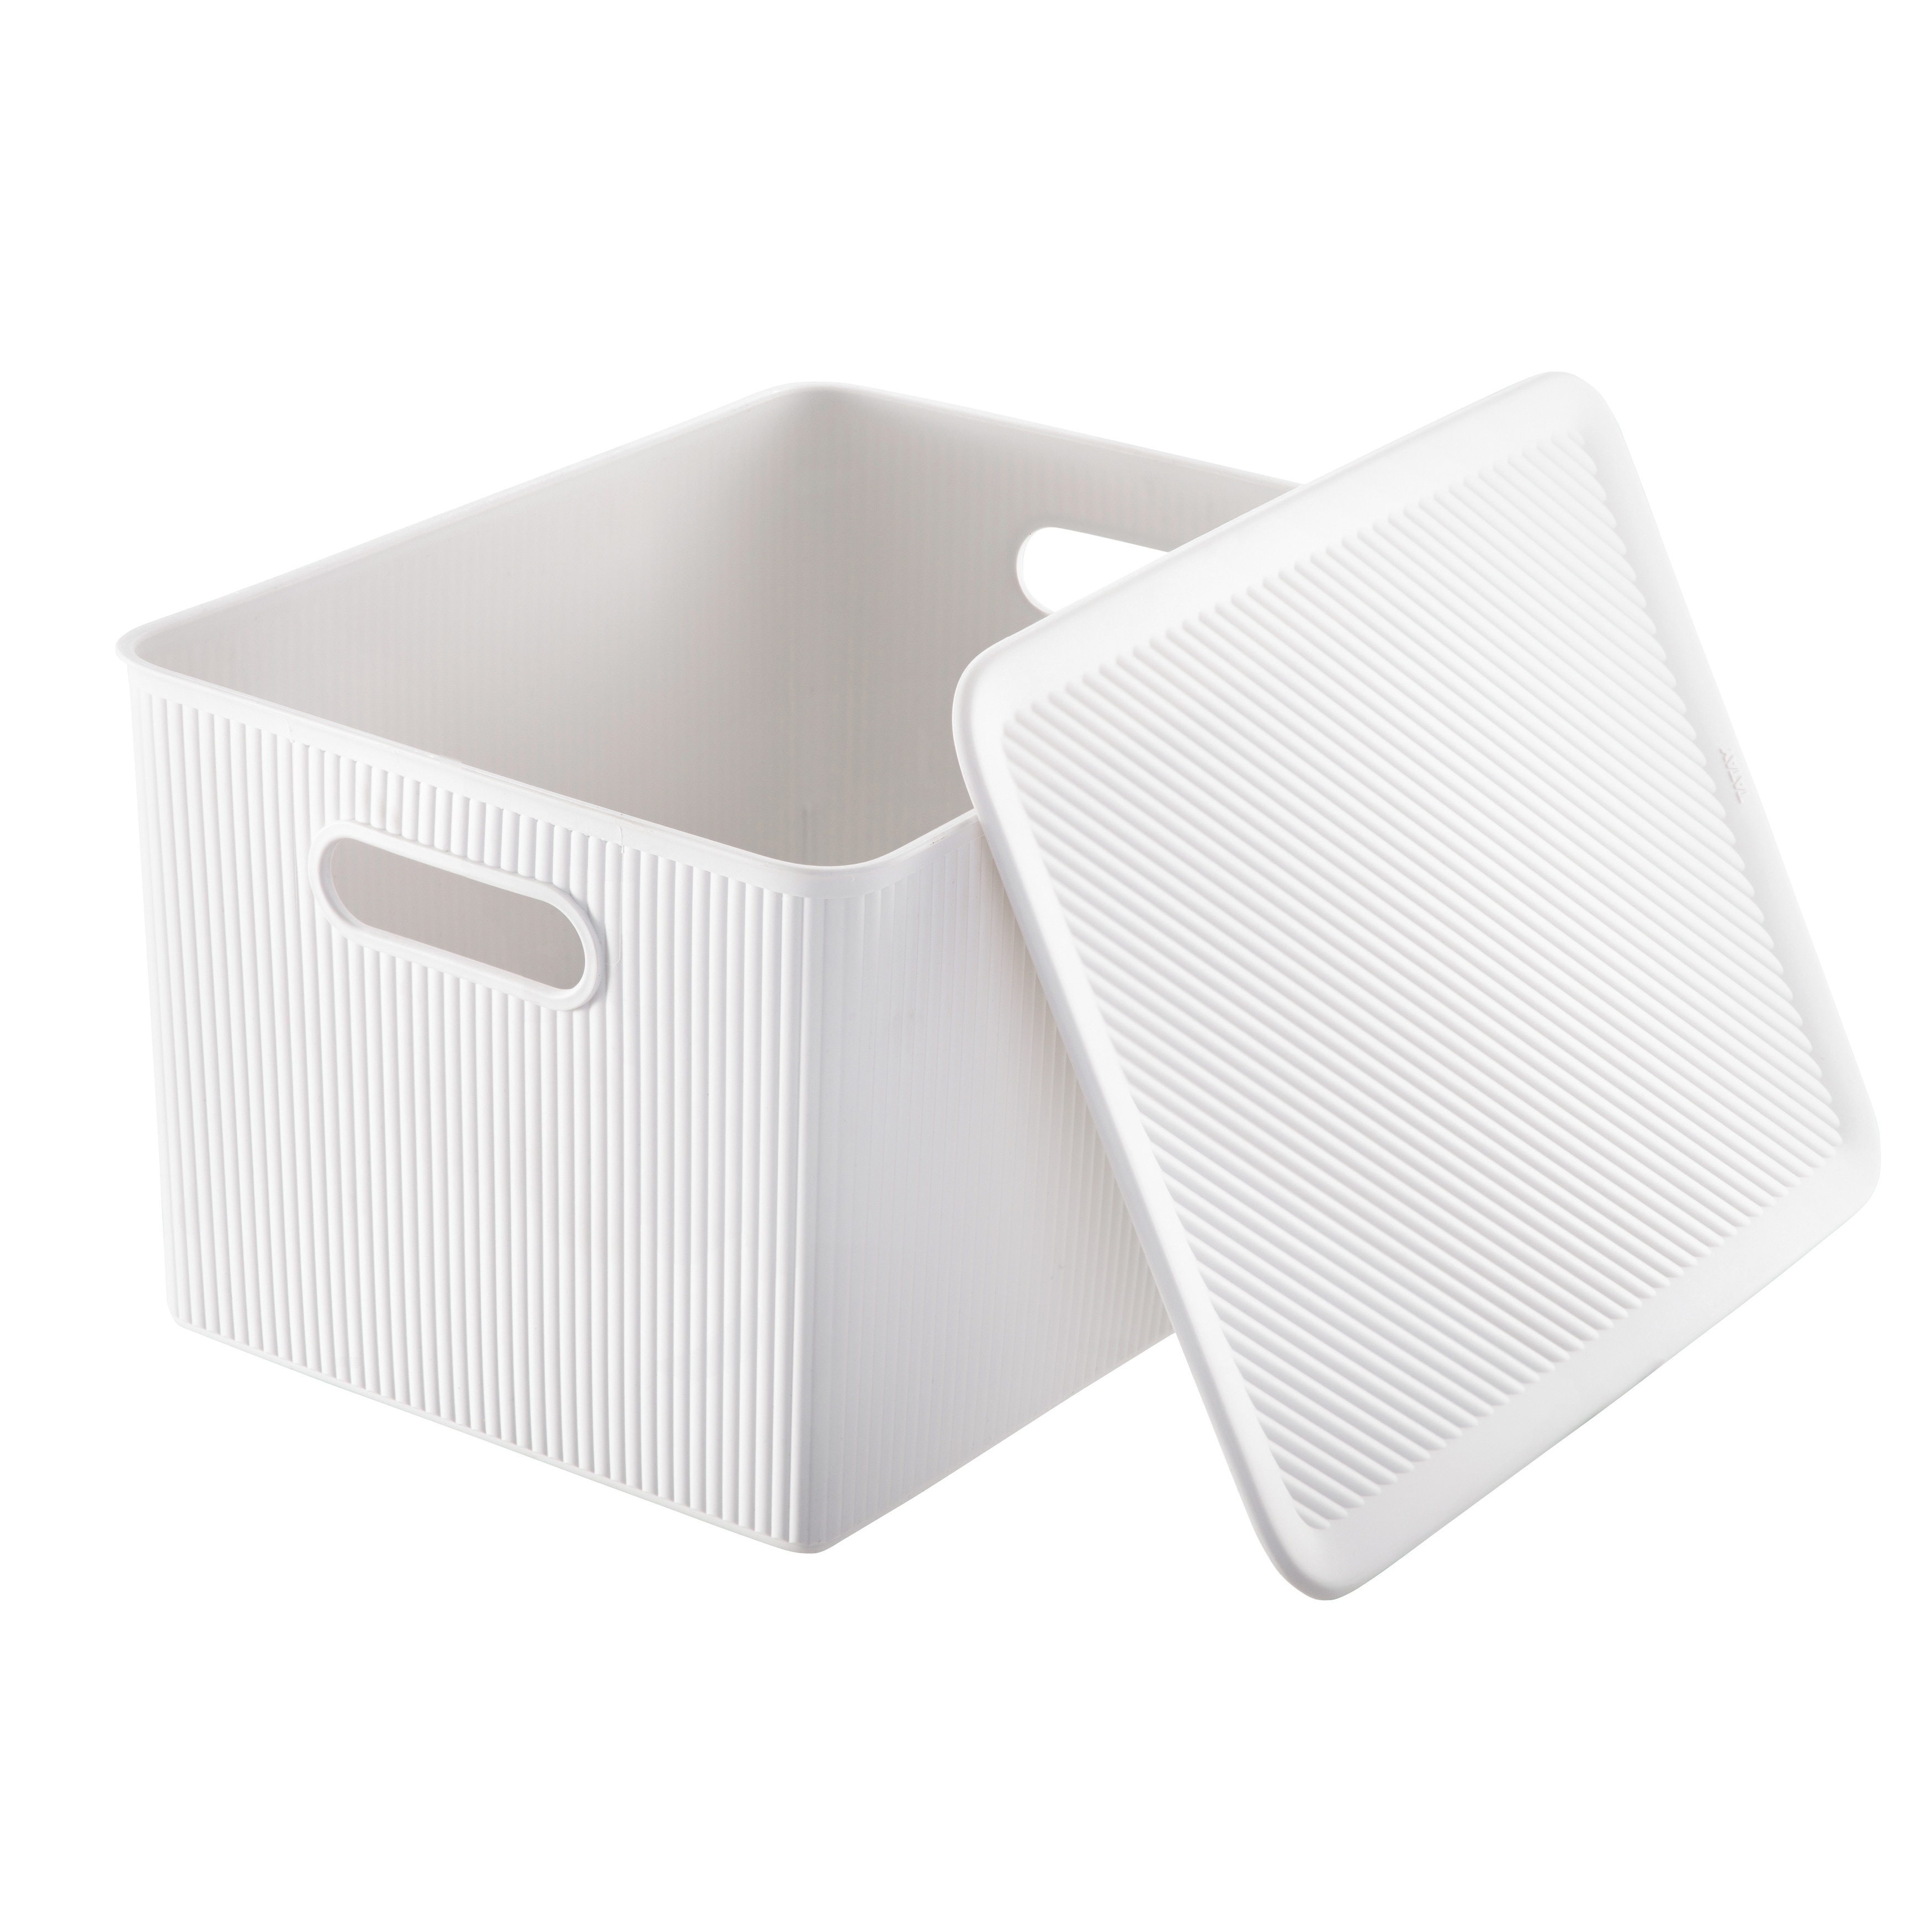 https://ak1.ostkcdn.com/images/products/is/images/direct/1a349de4cbf0262931542d832abf40c390b3d7ac/Superio-Ribbed-Storage-Bin-with-Matching-Lid.jpg